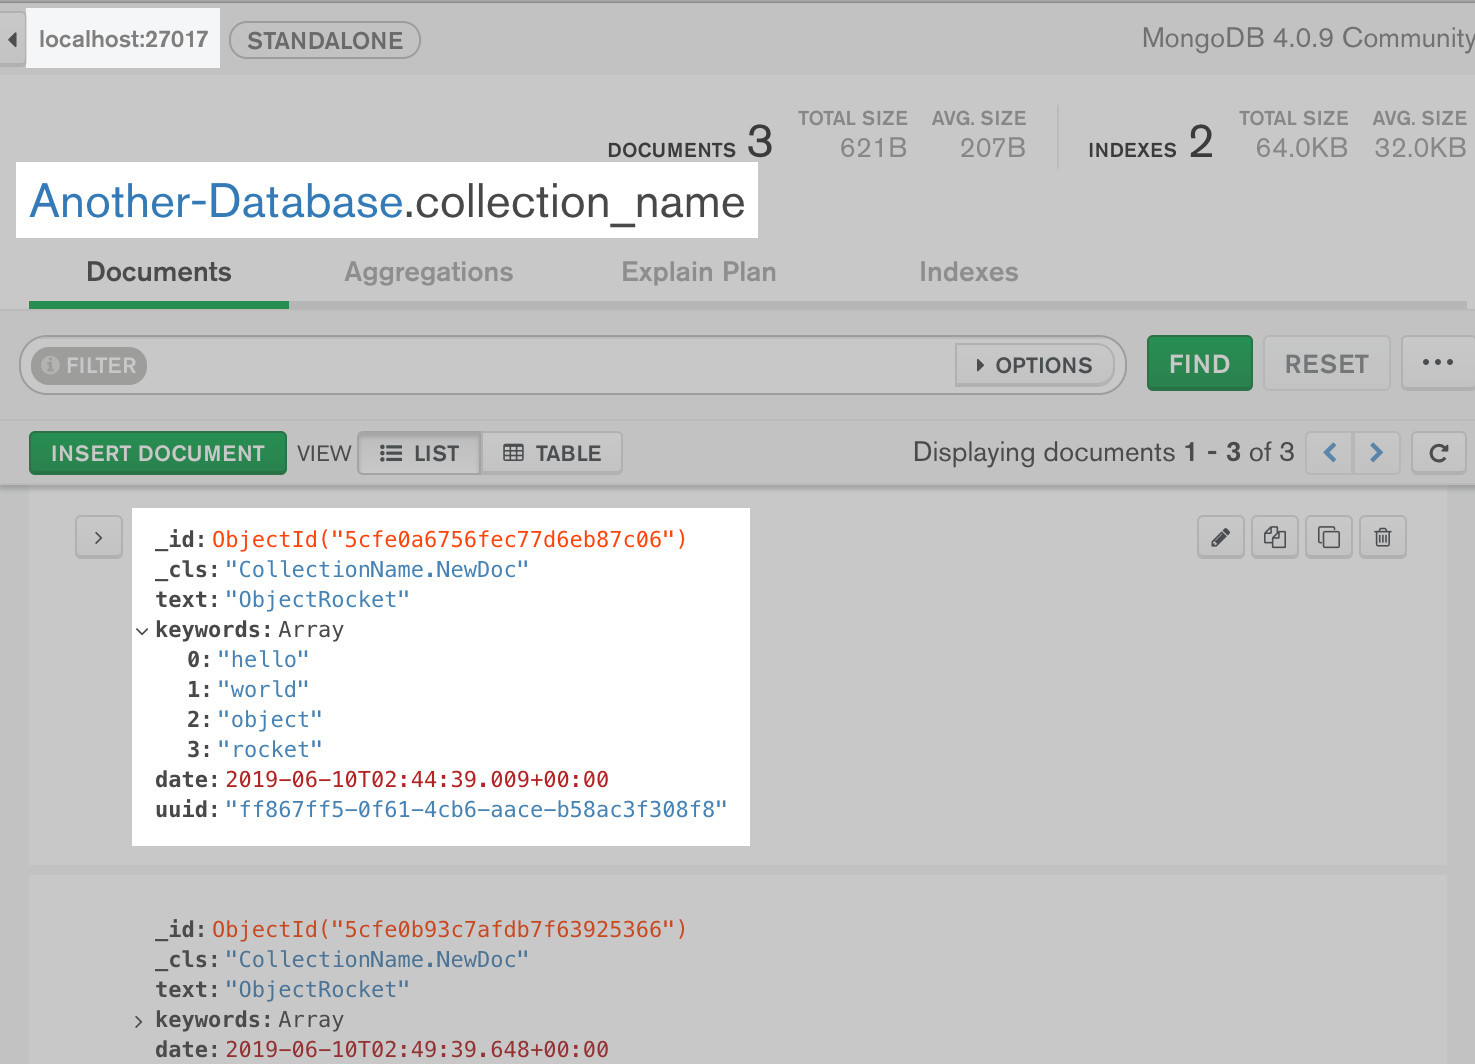 Screenshot of the MongoDB Compass UI showing a document created by MongoEngine in a Python script